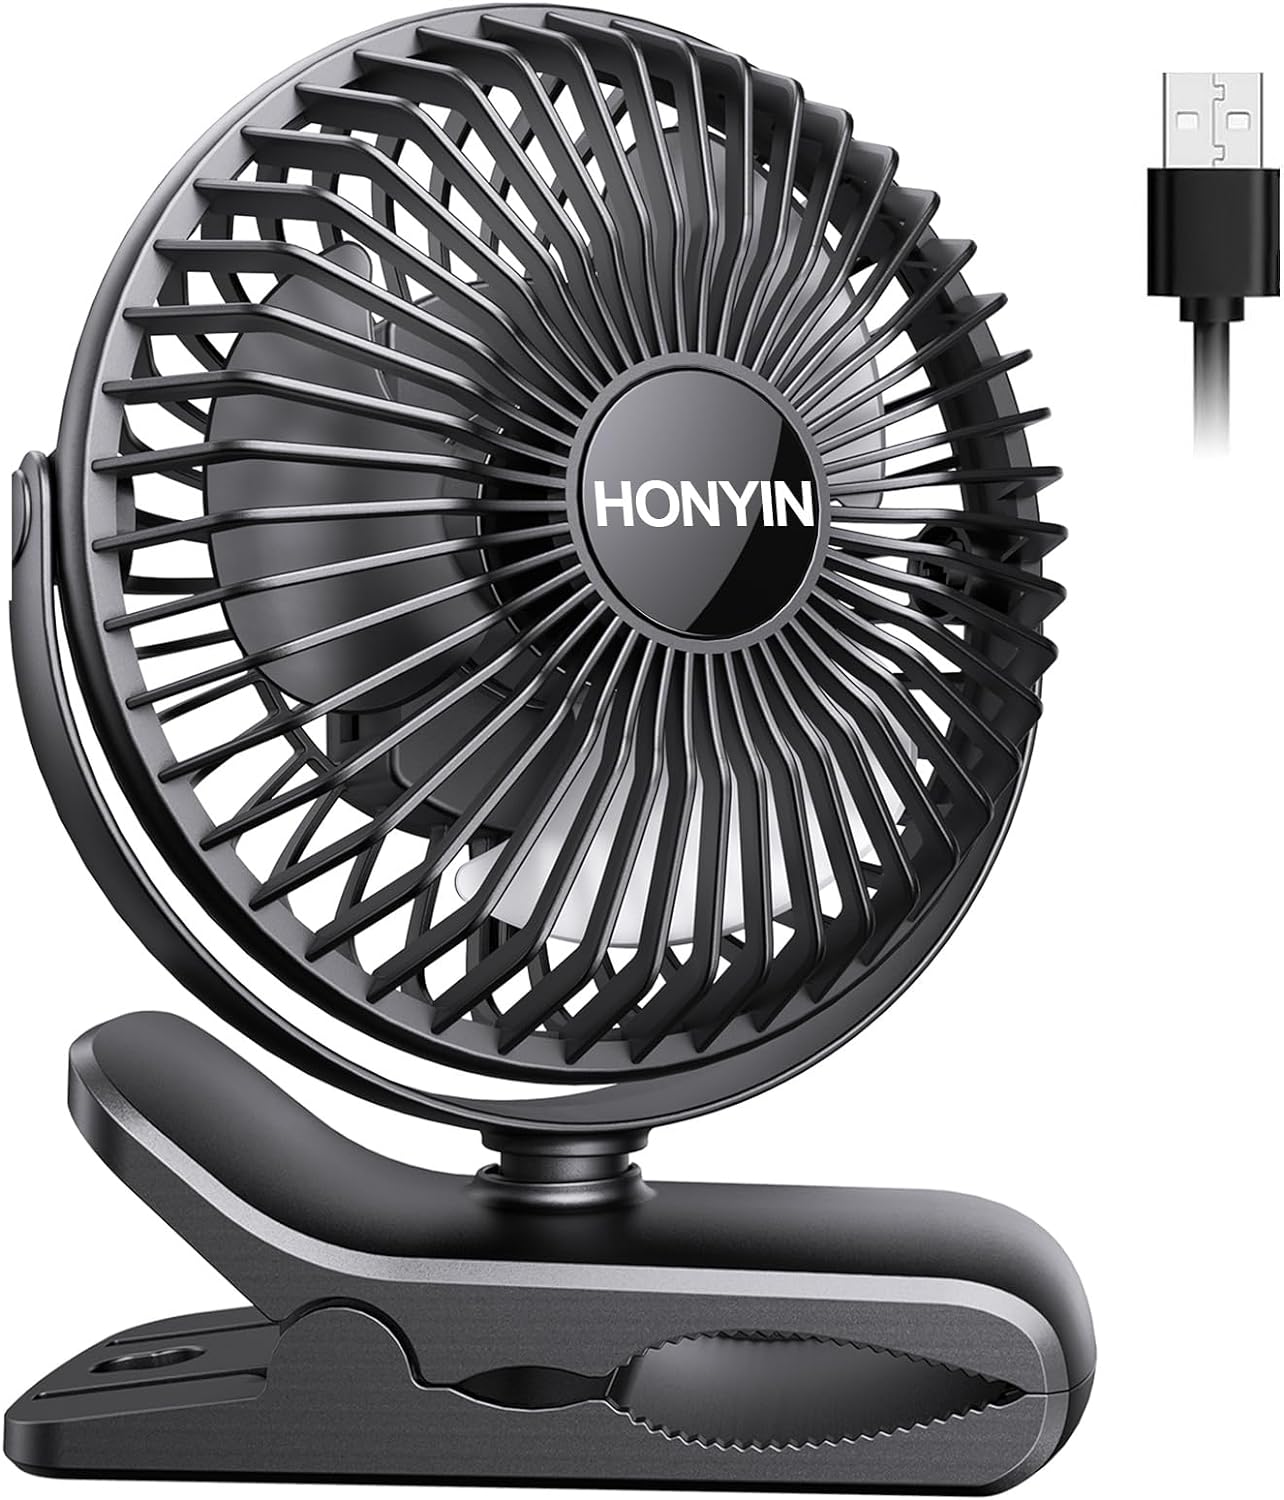 This powerful little fan is very versatile and keeps me cool at my warehouse job. I happen to have hyperhydrosis, which causes me to sweat profusely even in the dead of winter and to be intolerant of heat of any kind, so I needed a fan for my work station. I'm not allowed to plug anything in to an outlet, so I needed something battery-powered, which this fan is. One charge lasts me two to three days of 8-10 work shifts, which is so convenient! It stays clipped in place at my station too, unlike 